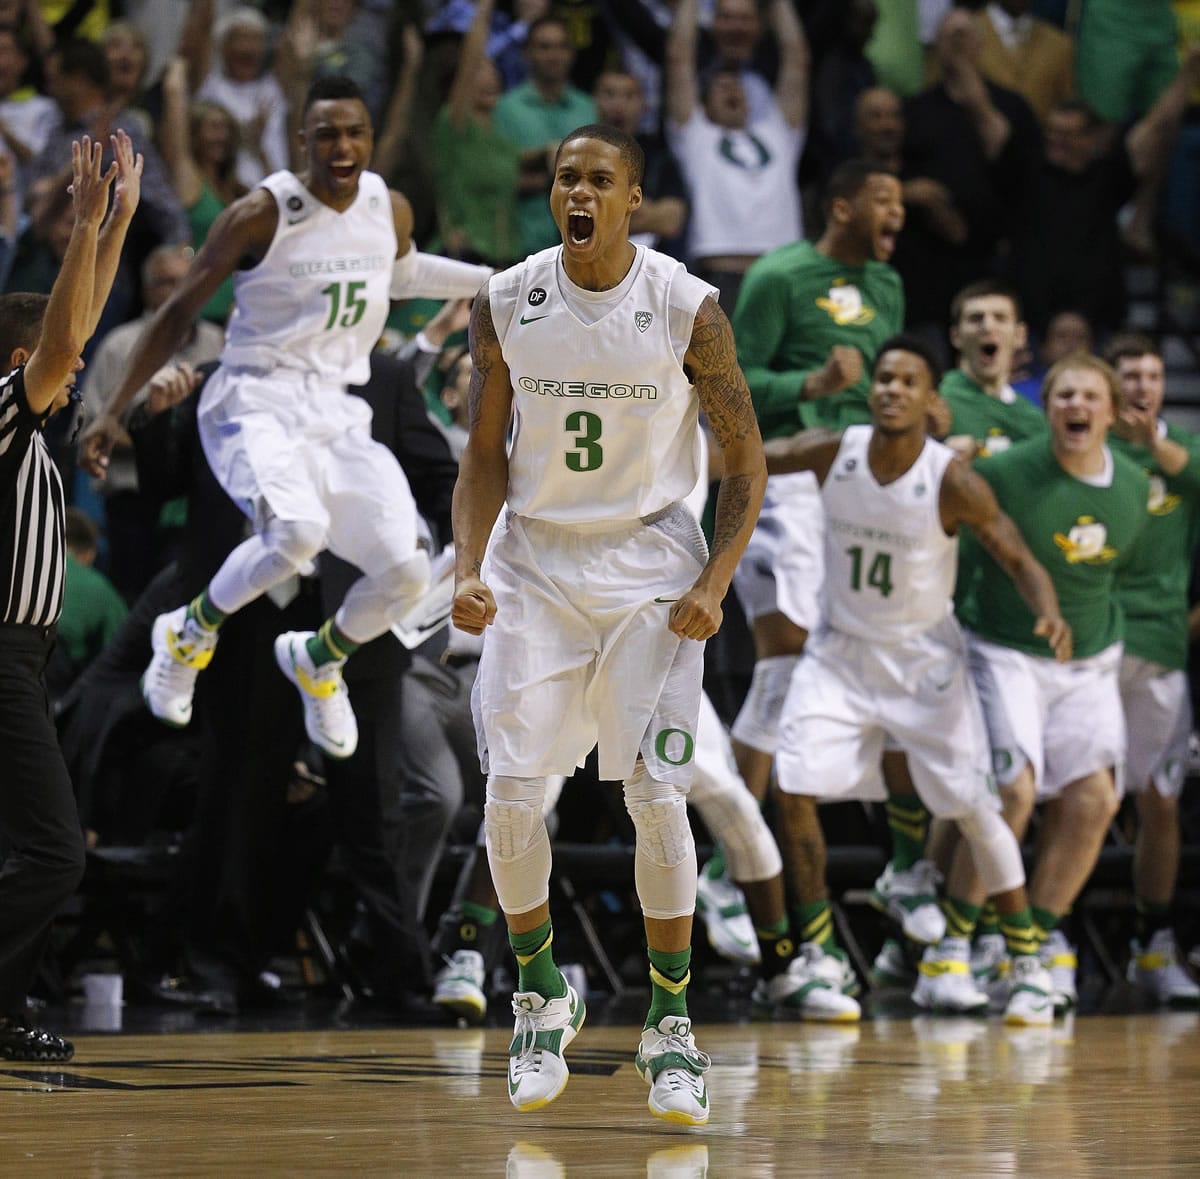 Oregon's Joseph Young celebrates after scoring a 3-point game winning shot against Utah in the final seconds of the semifinals of the Pac-12 conference tournament Friday.